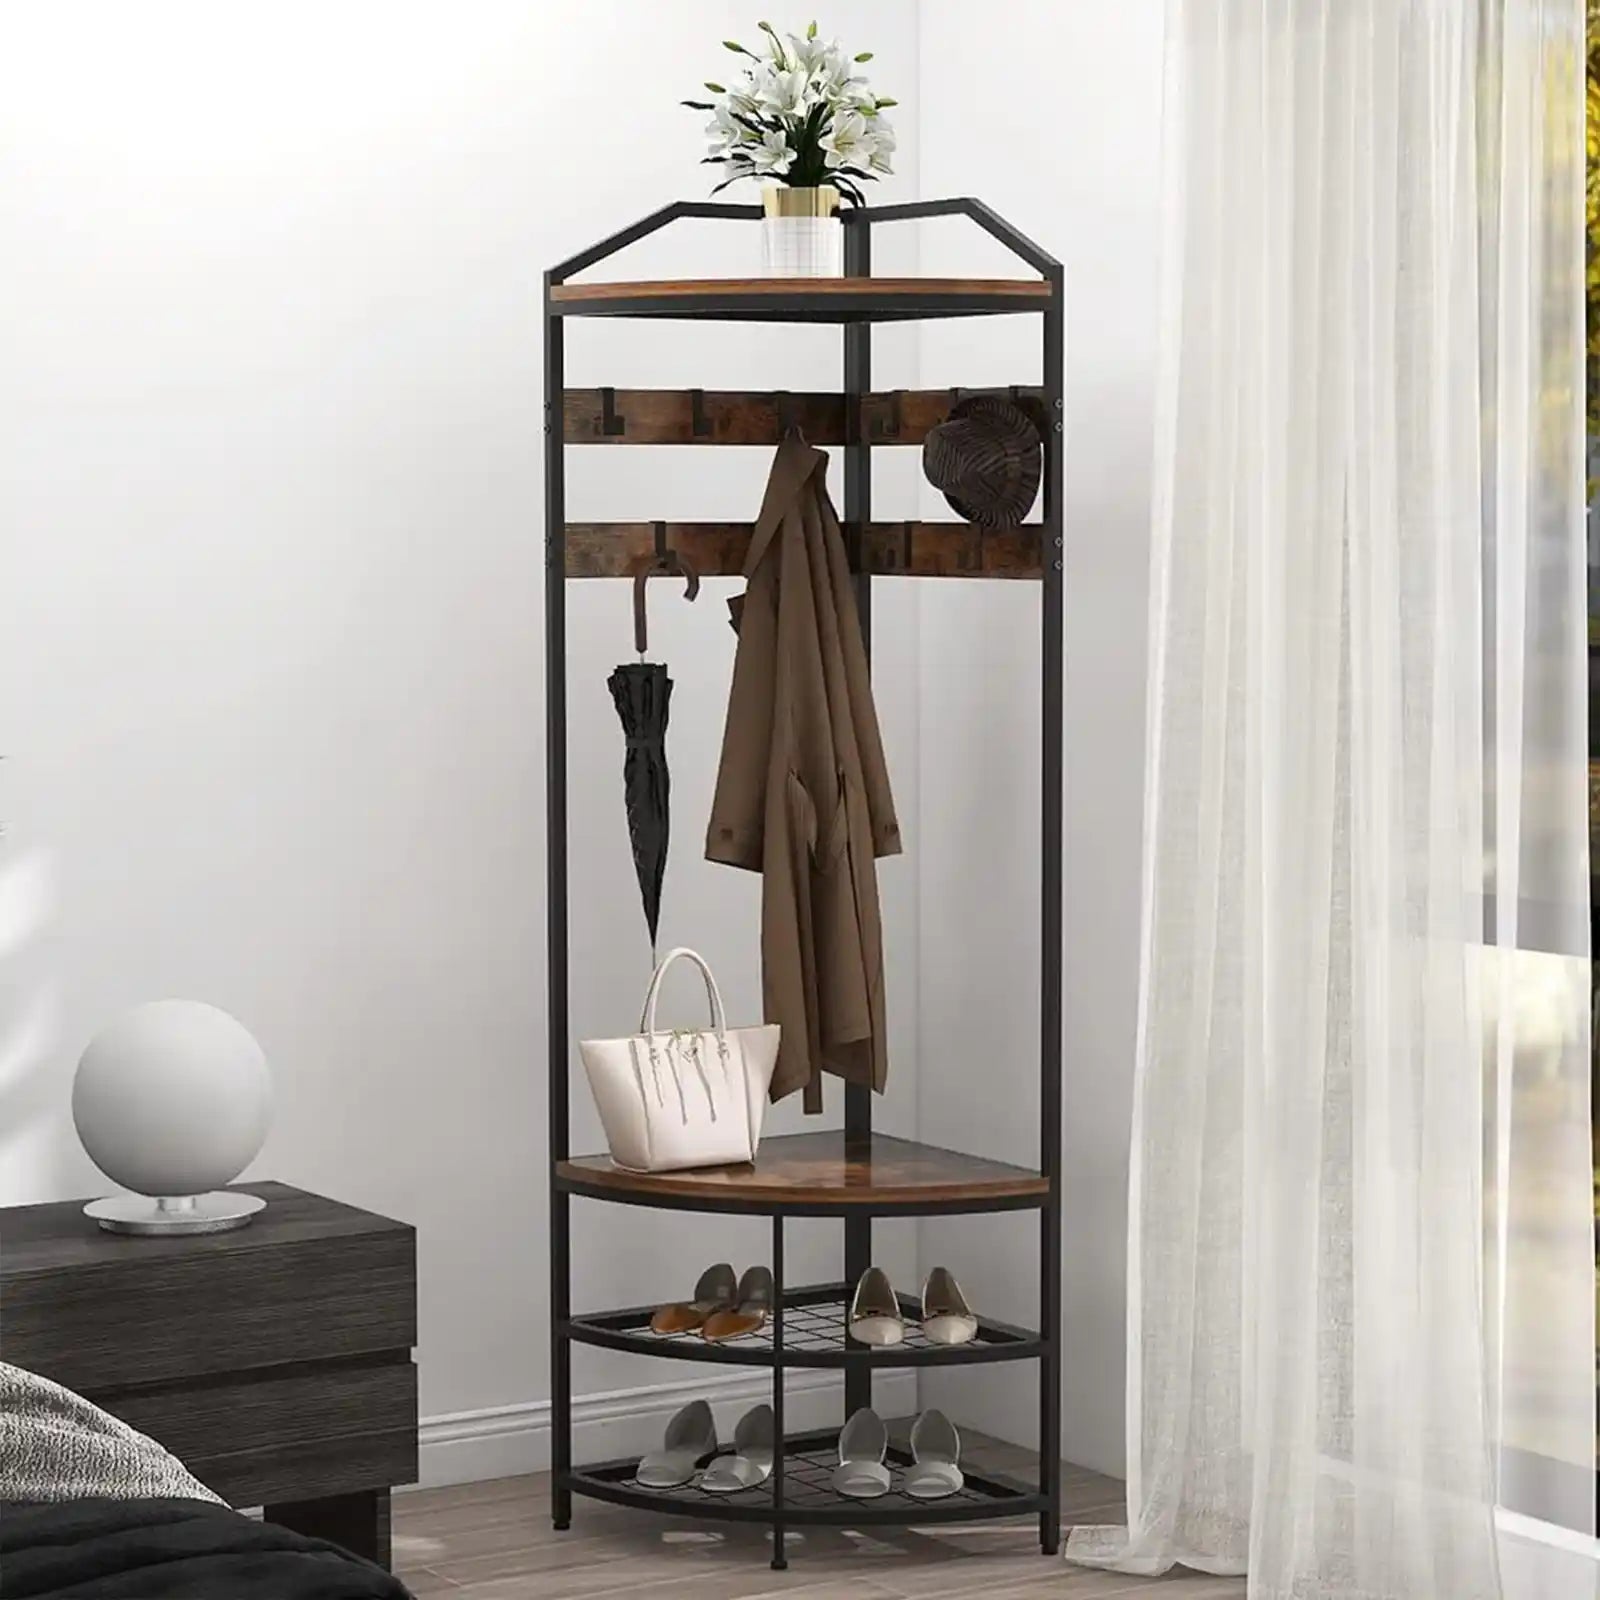 Corner Hall Tree with Shoe Bench Entryway Coat Rack with 10 Metal Movable Hooks Freestanding Clothes Rack Shoes Shelf Organizer for Home Office Bedroom